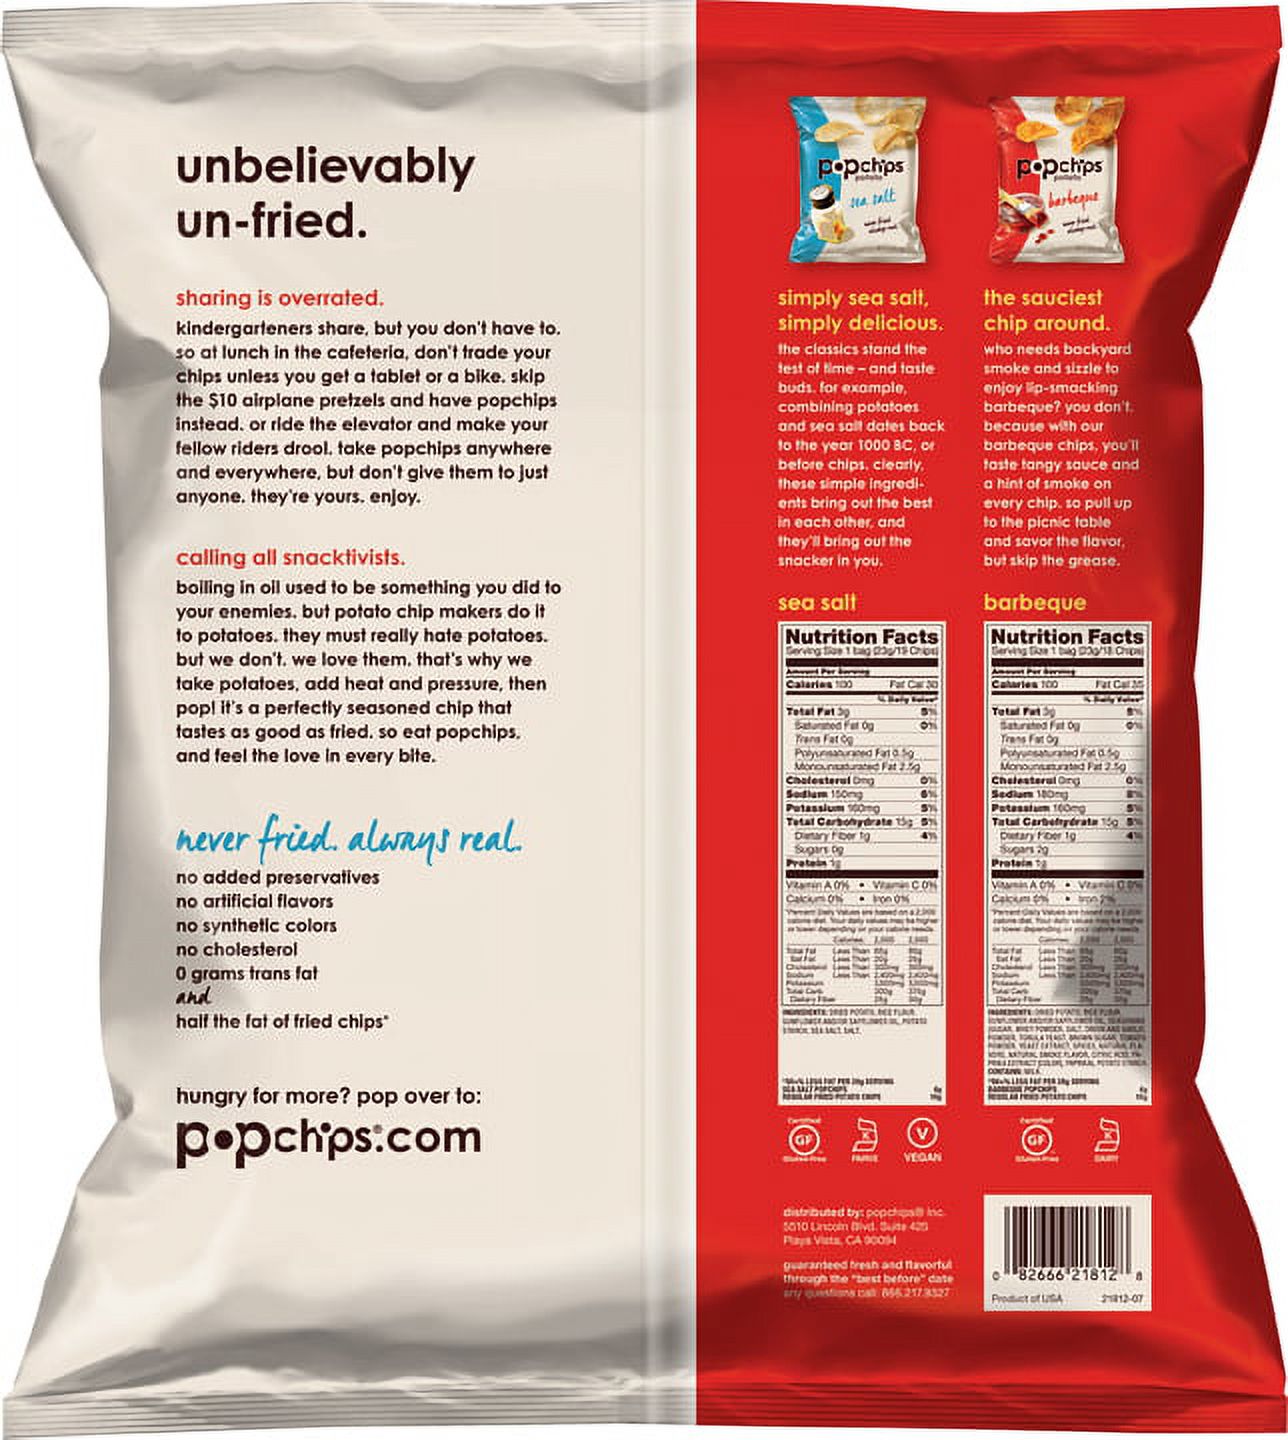 Popchips variety pack, 6 CT - image 2 of 6